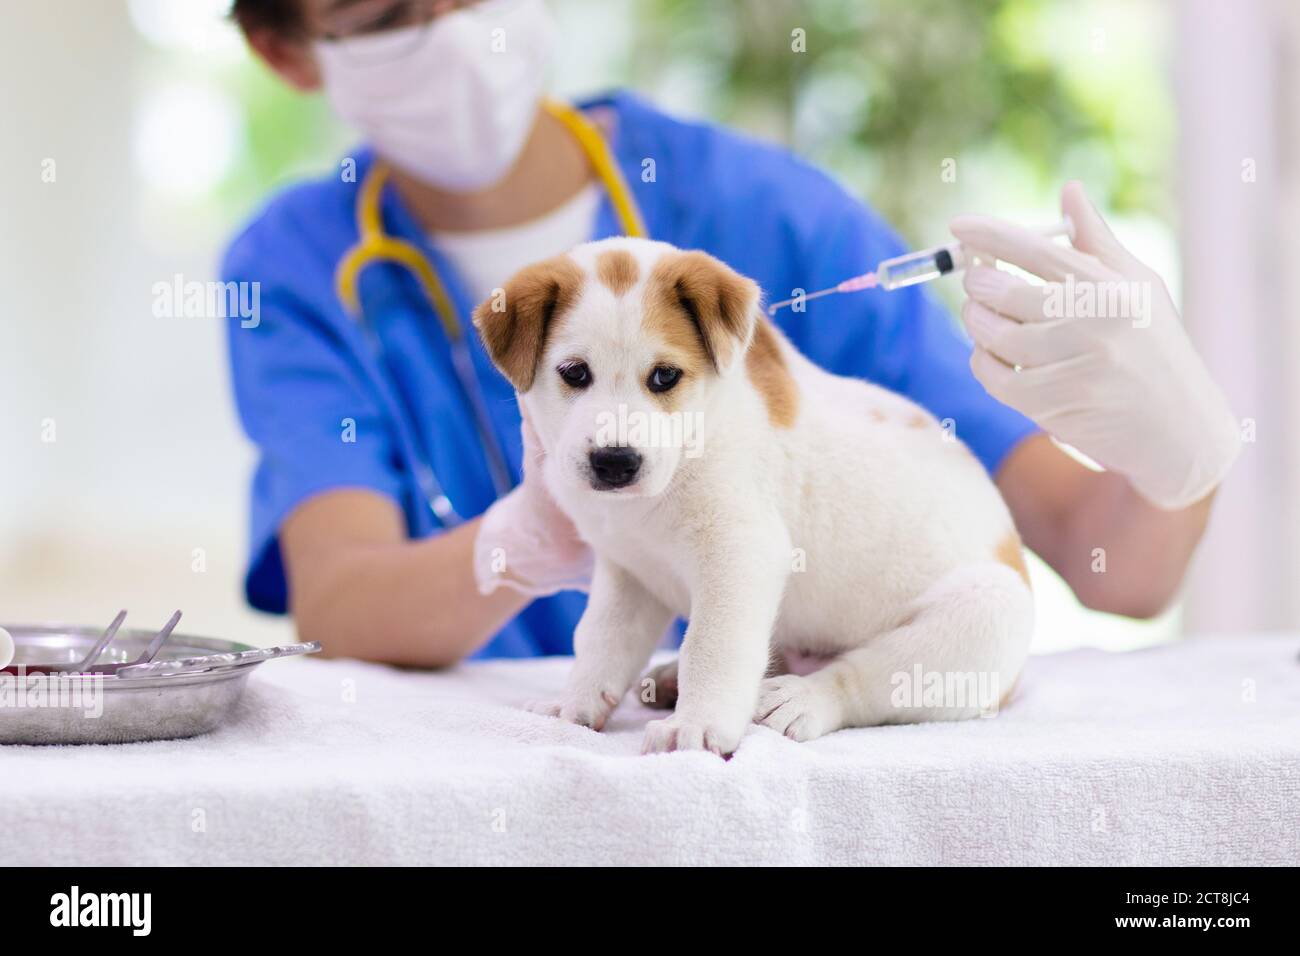 what do vets check for in puppies